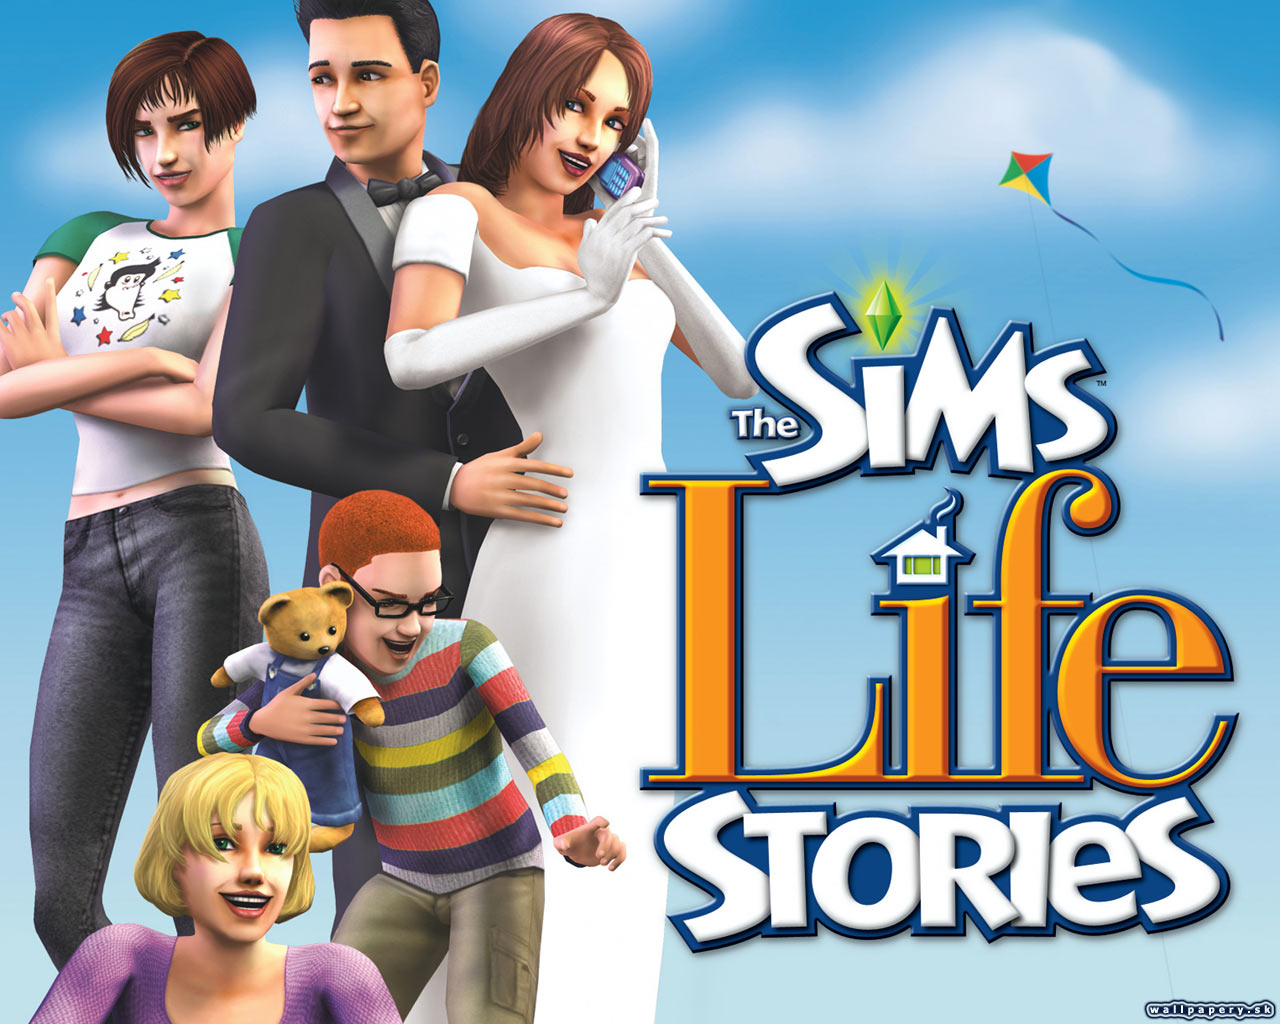 The Sims Life Stories - wallpaper 1